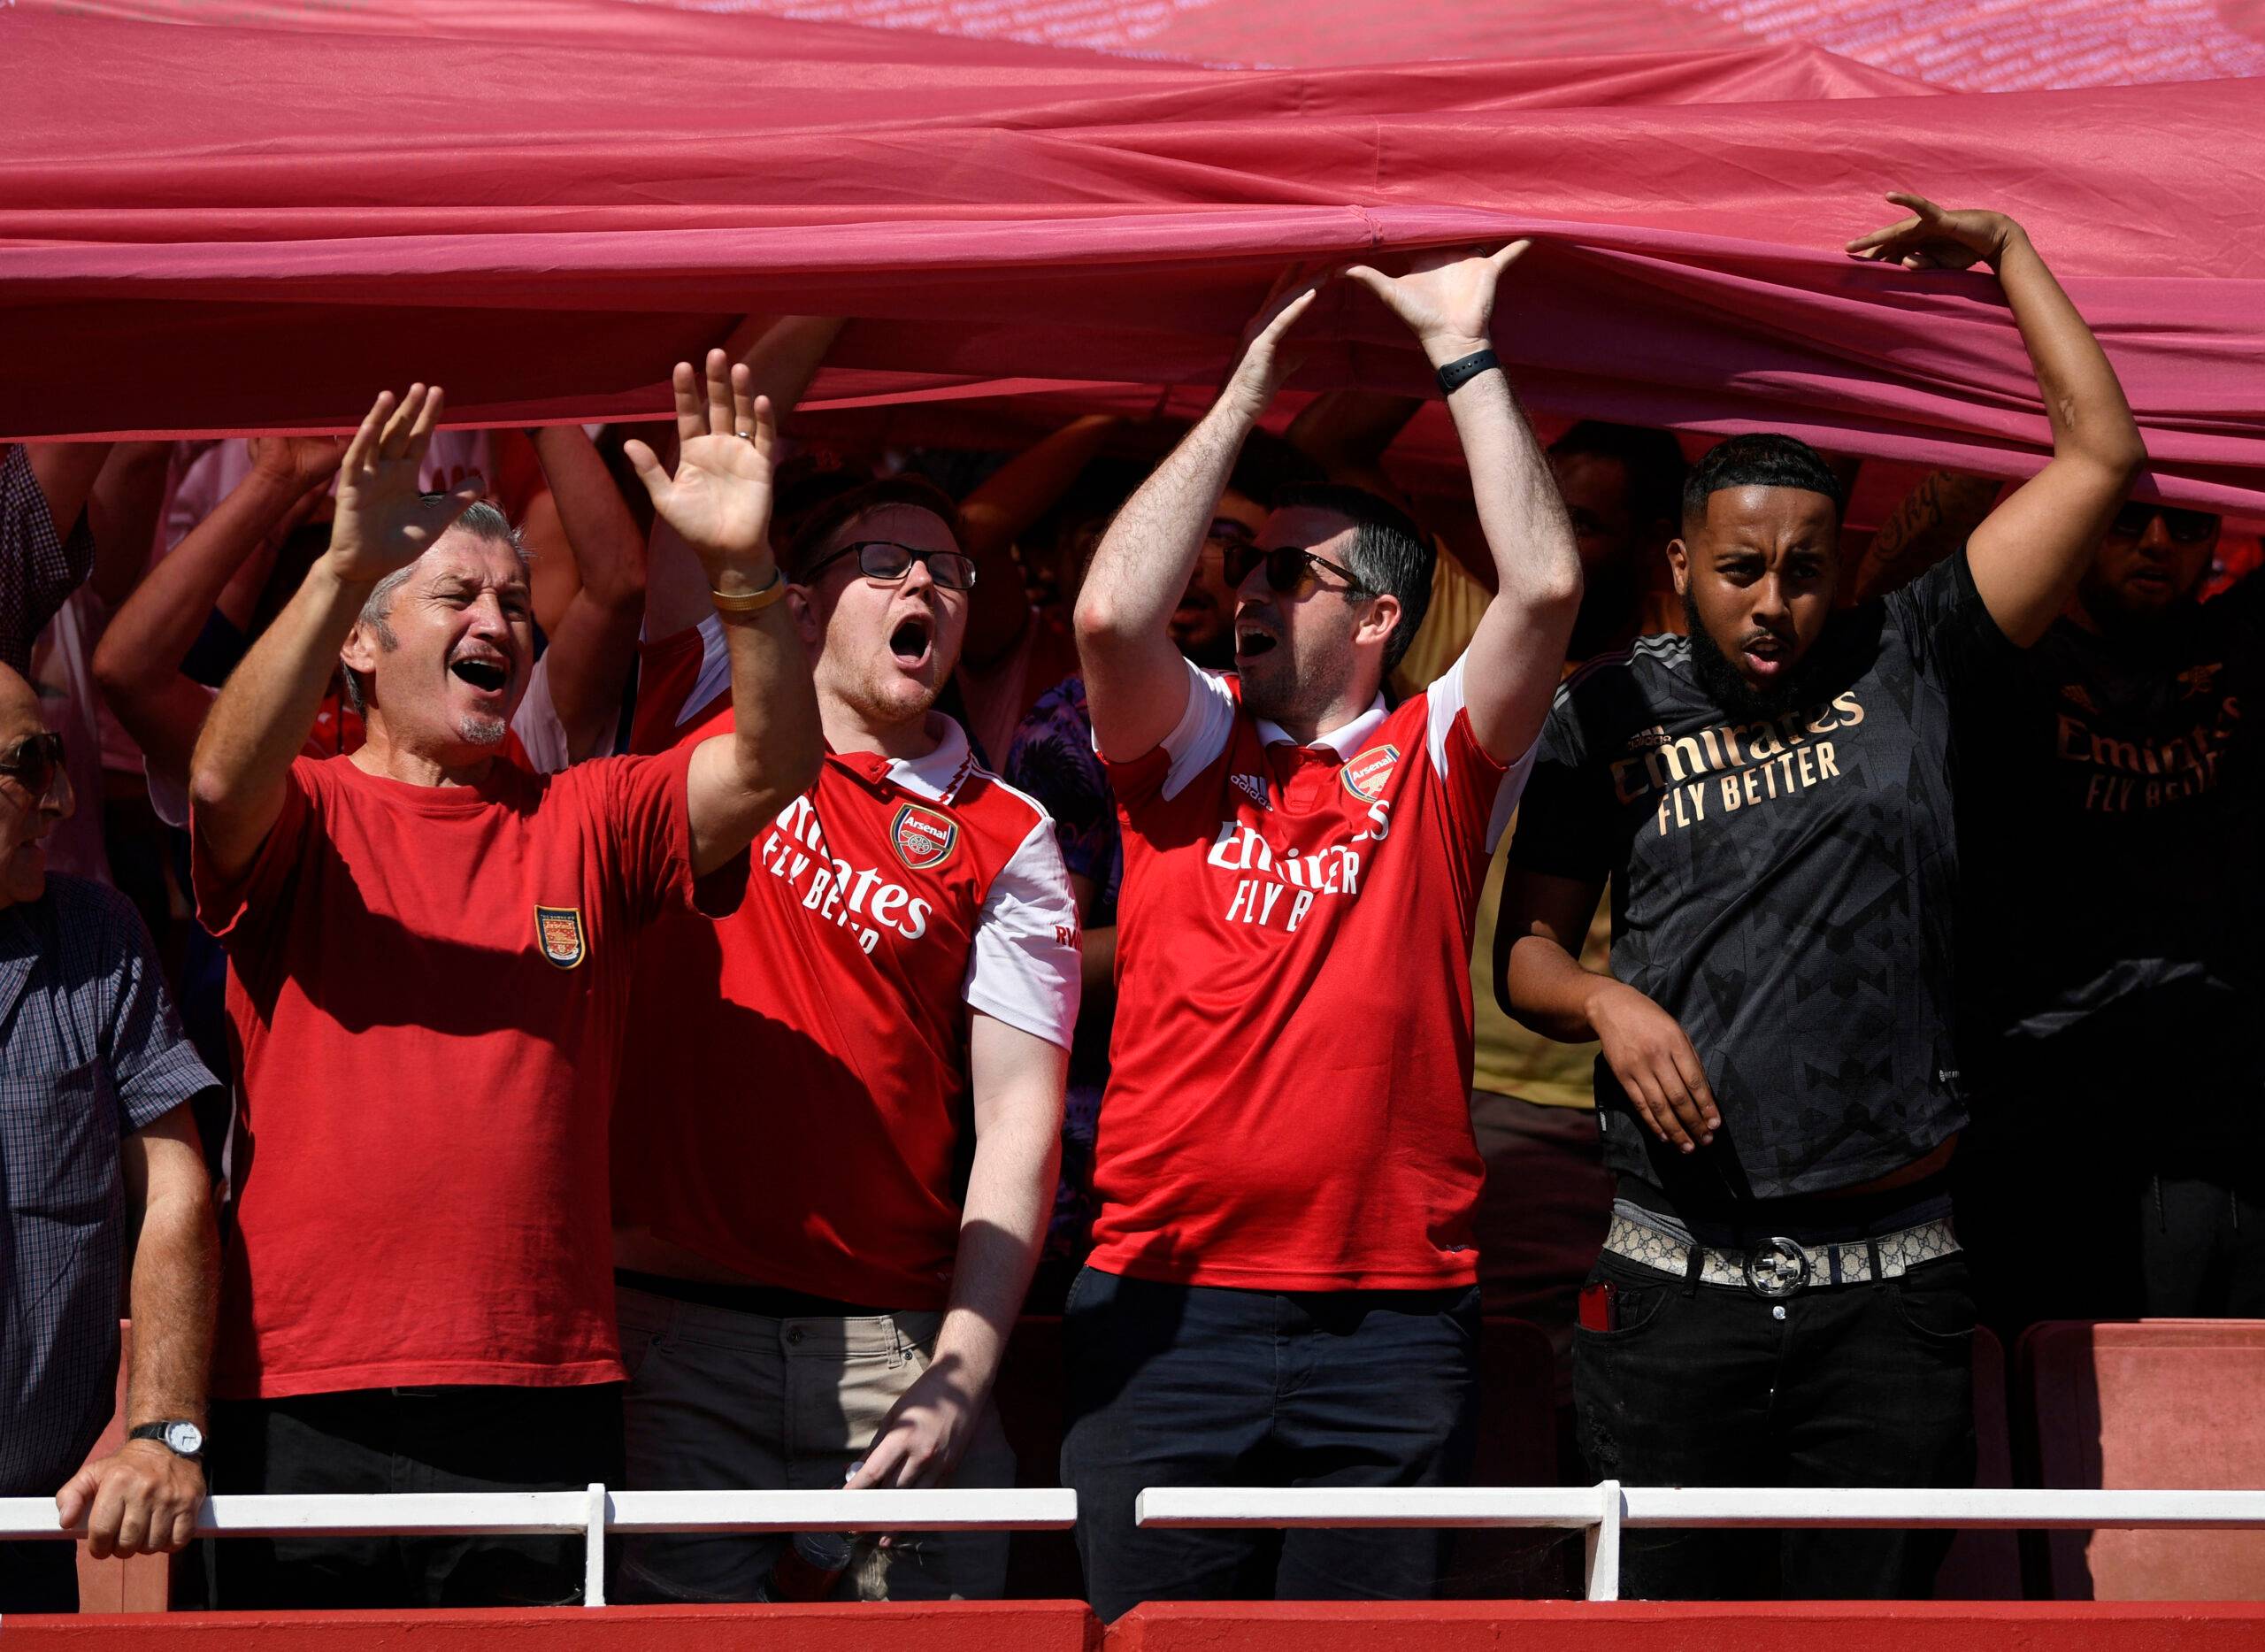 Fans at Arsenal vs Leicester.